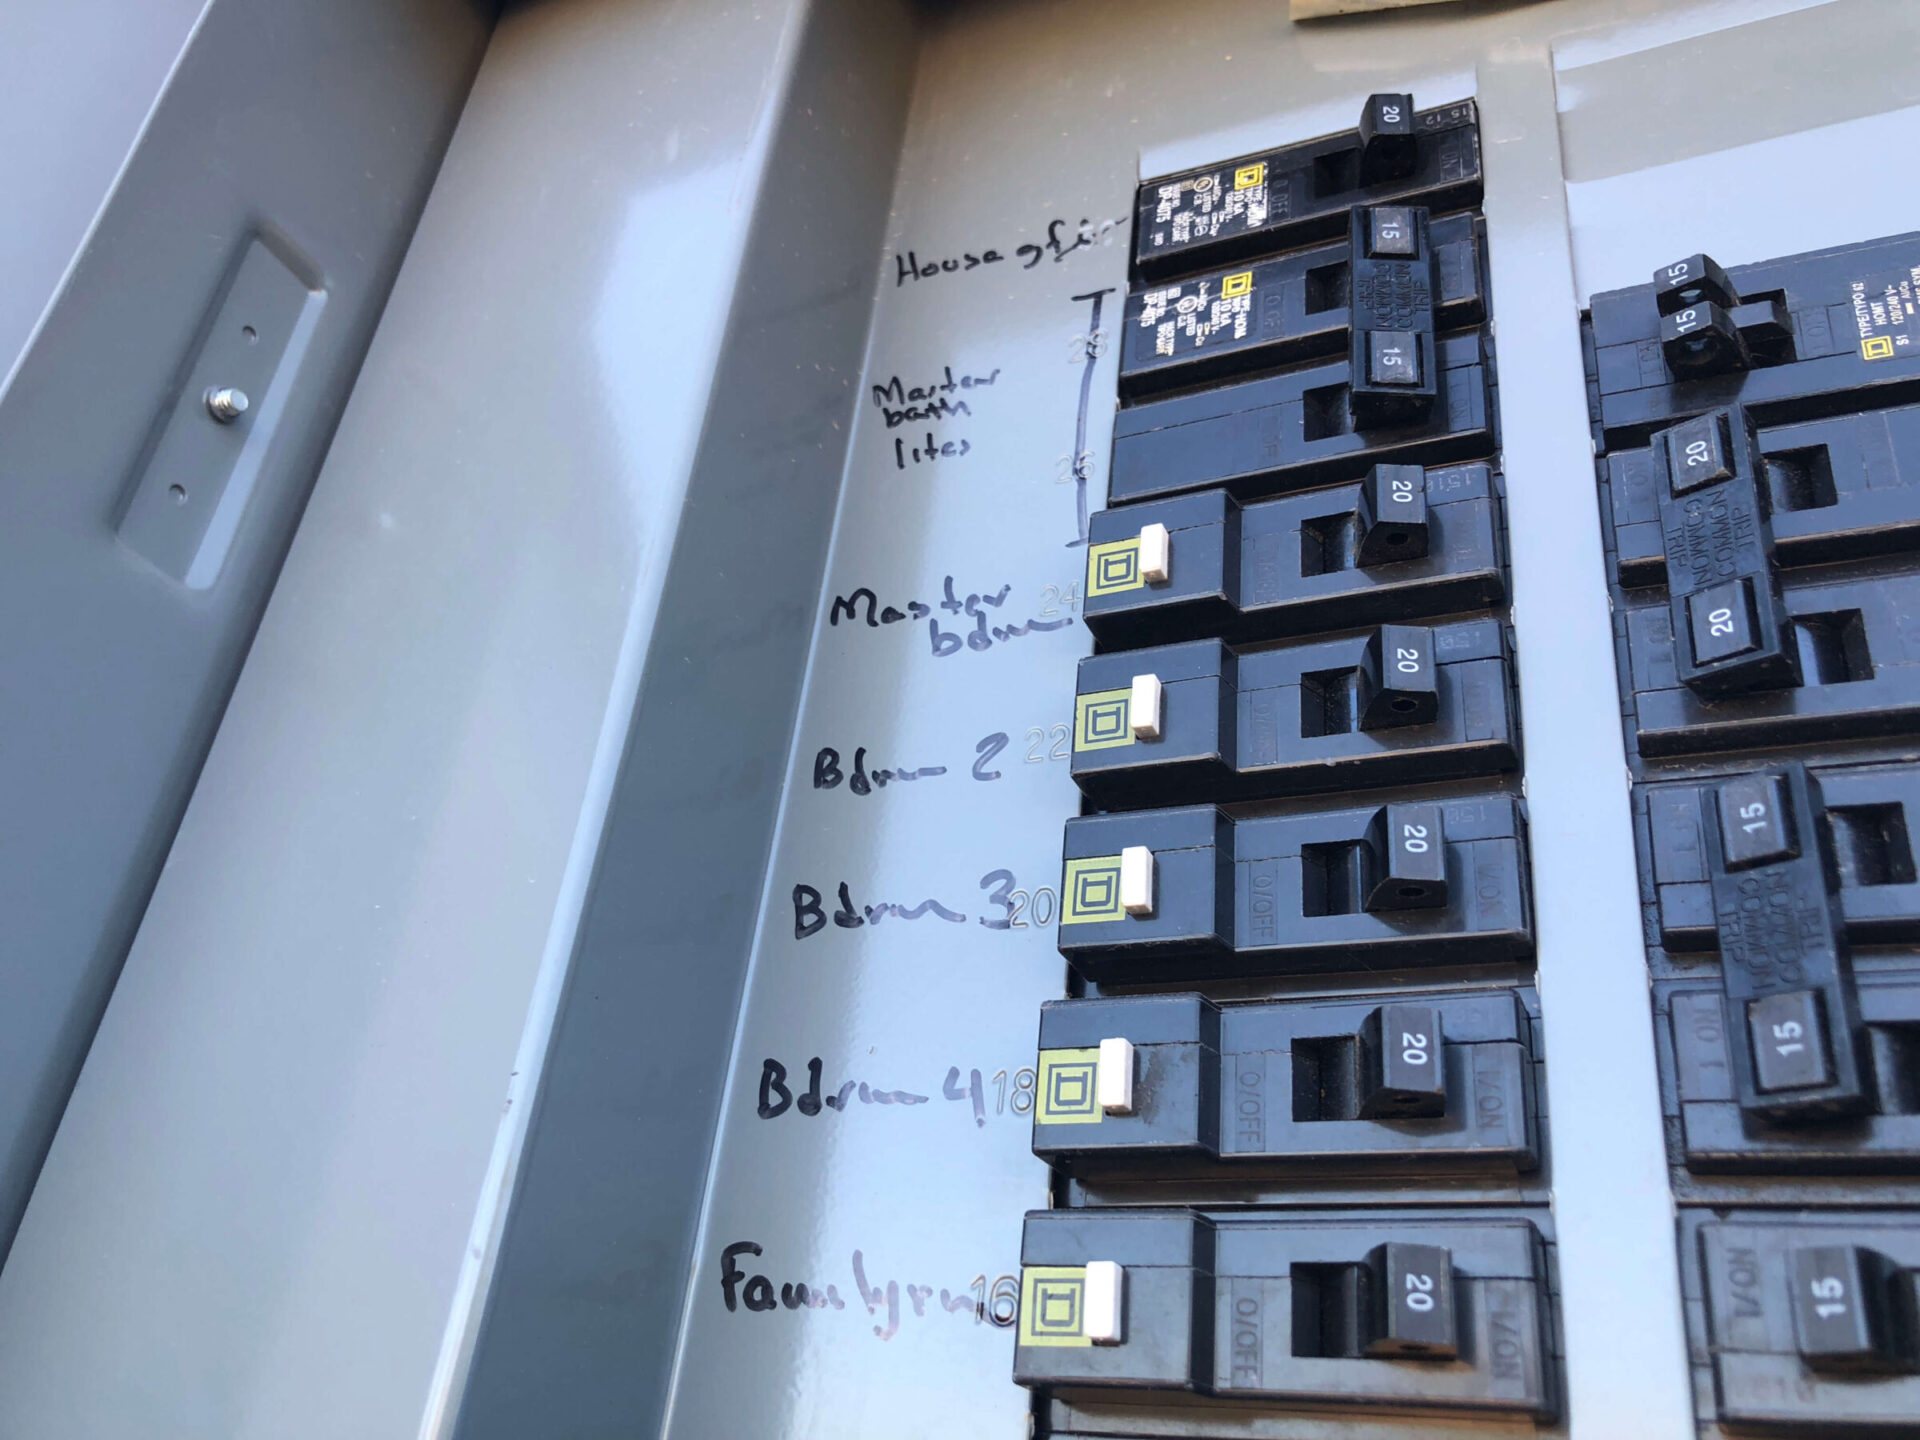 An electrical panel with handwritten labels for circuit breakers indicating various rooms like bedrooms and master bath. Circuit breakers are numbered with amperages visible.